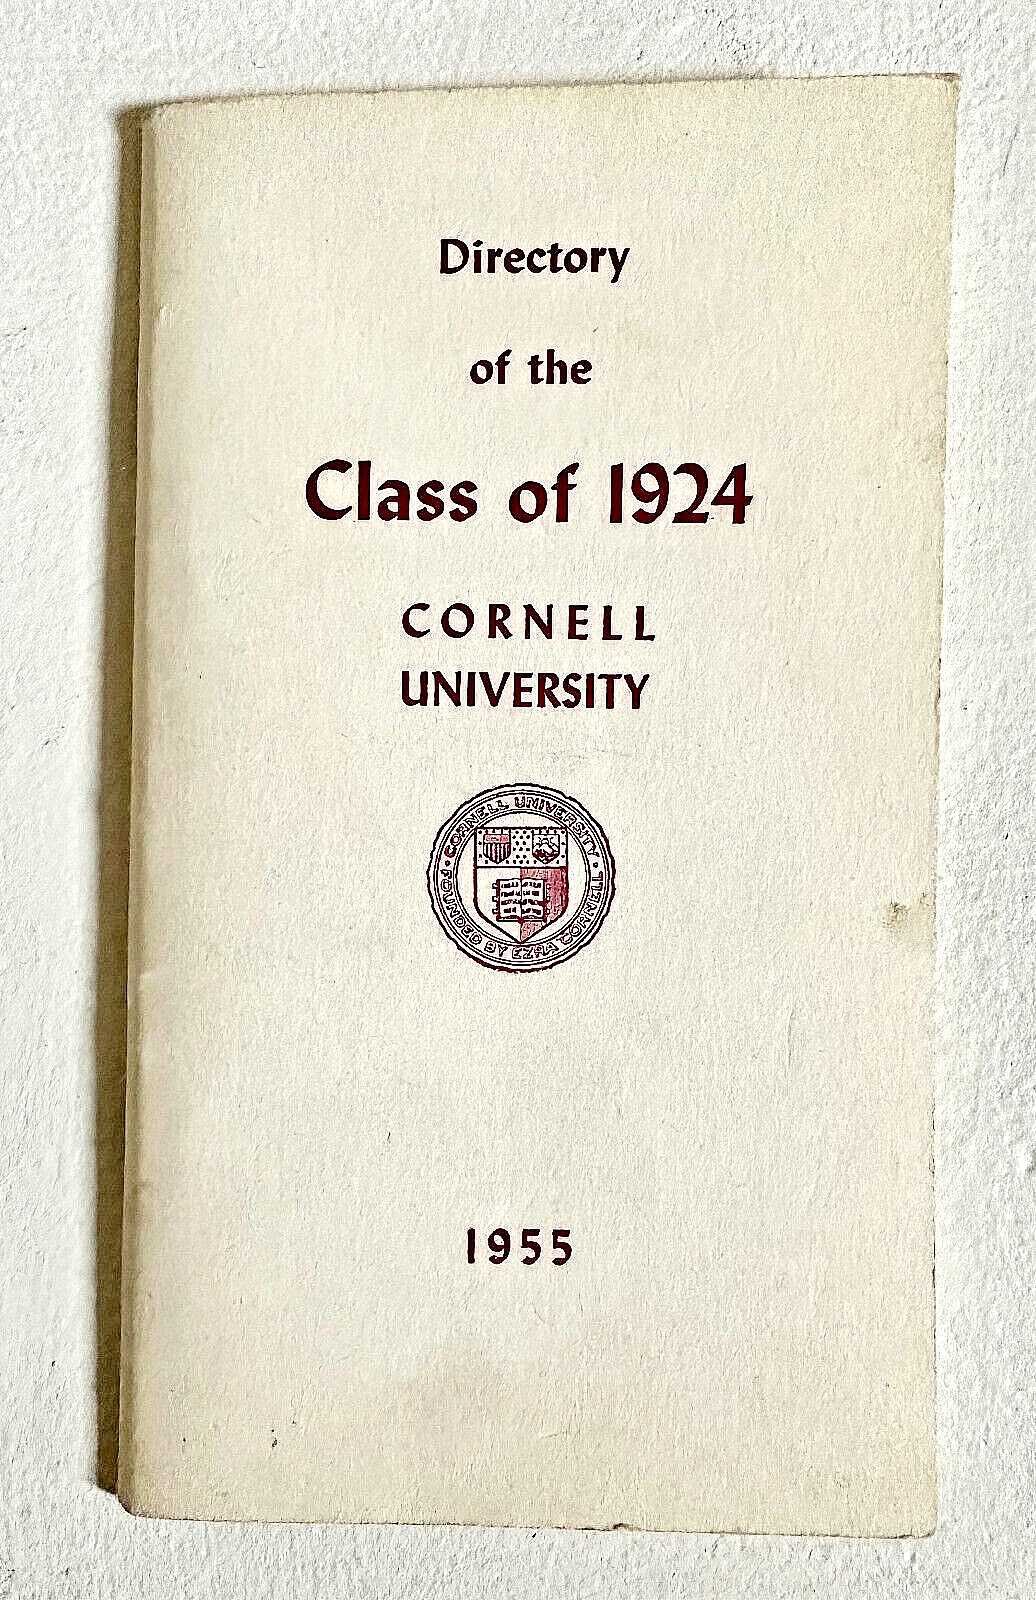 Directory of the Class of 1924, CORNELL UNIVERSITY, published 1955 